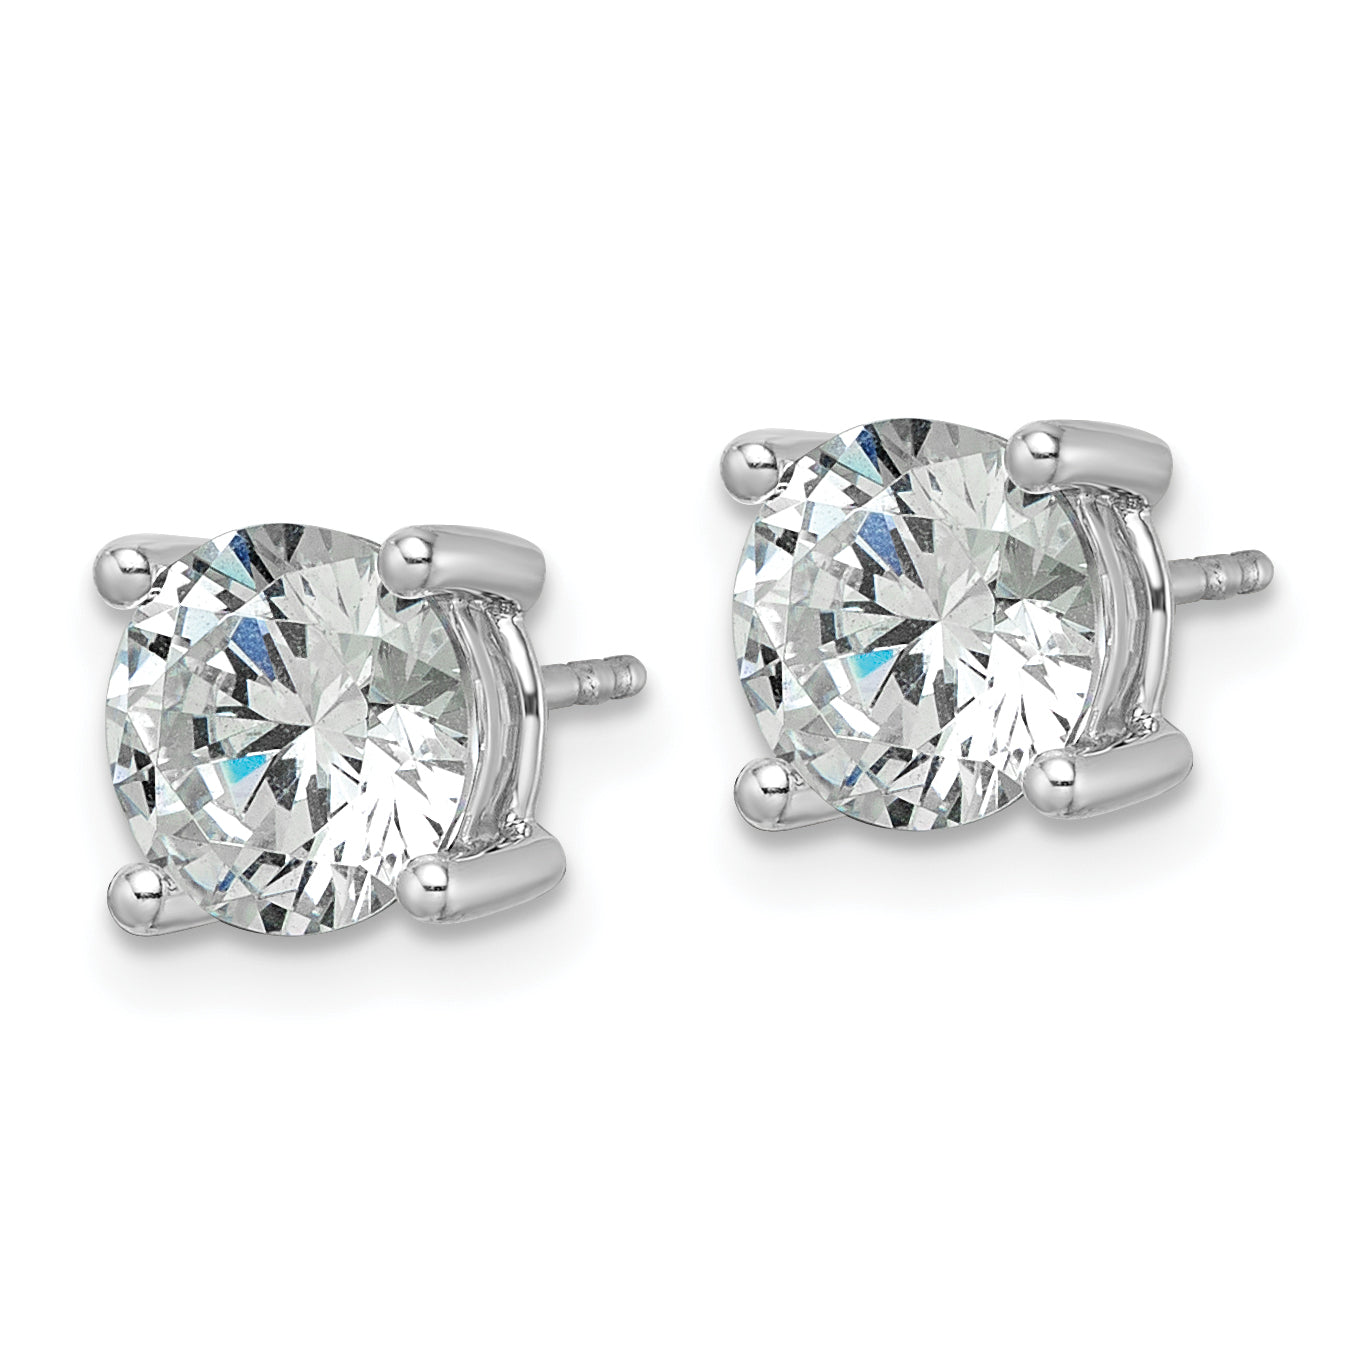 14k White Gold 3 carat total weight Round Certified VS/SI GH Lab Grown Diamond 4 Prong Stud Post Earrings